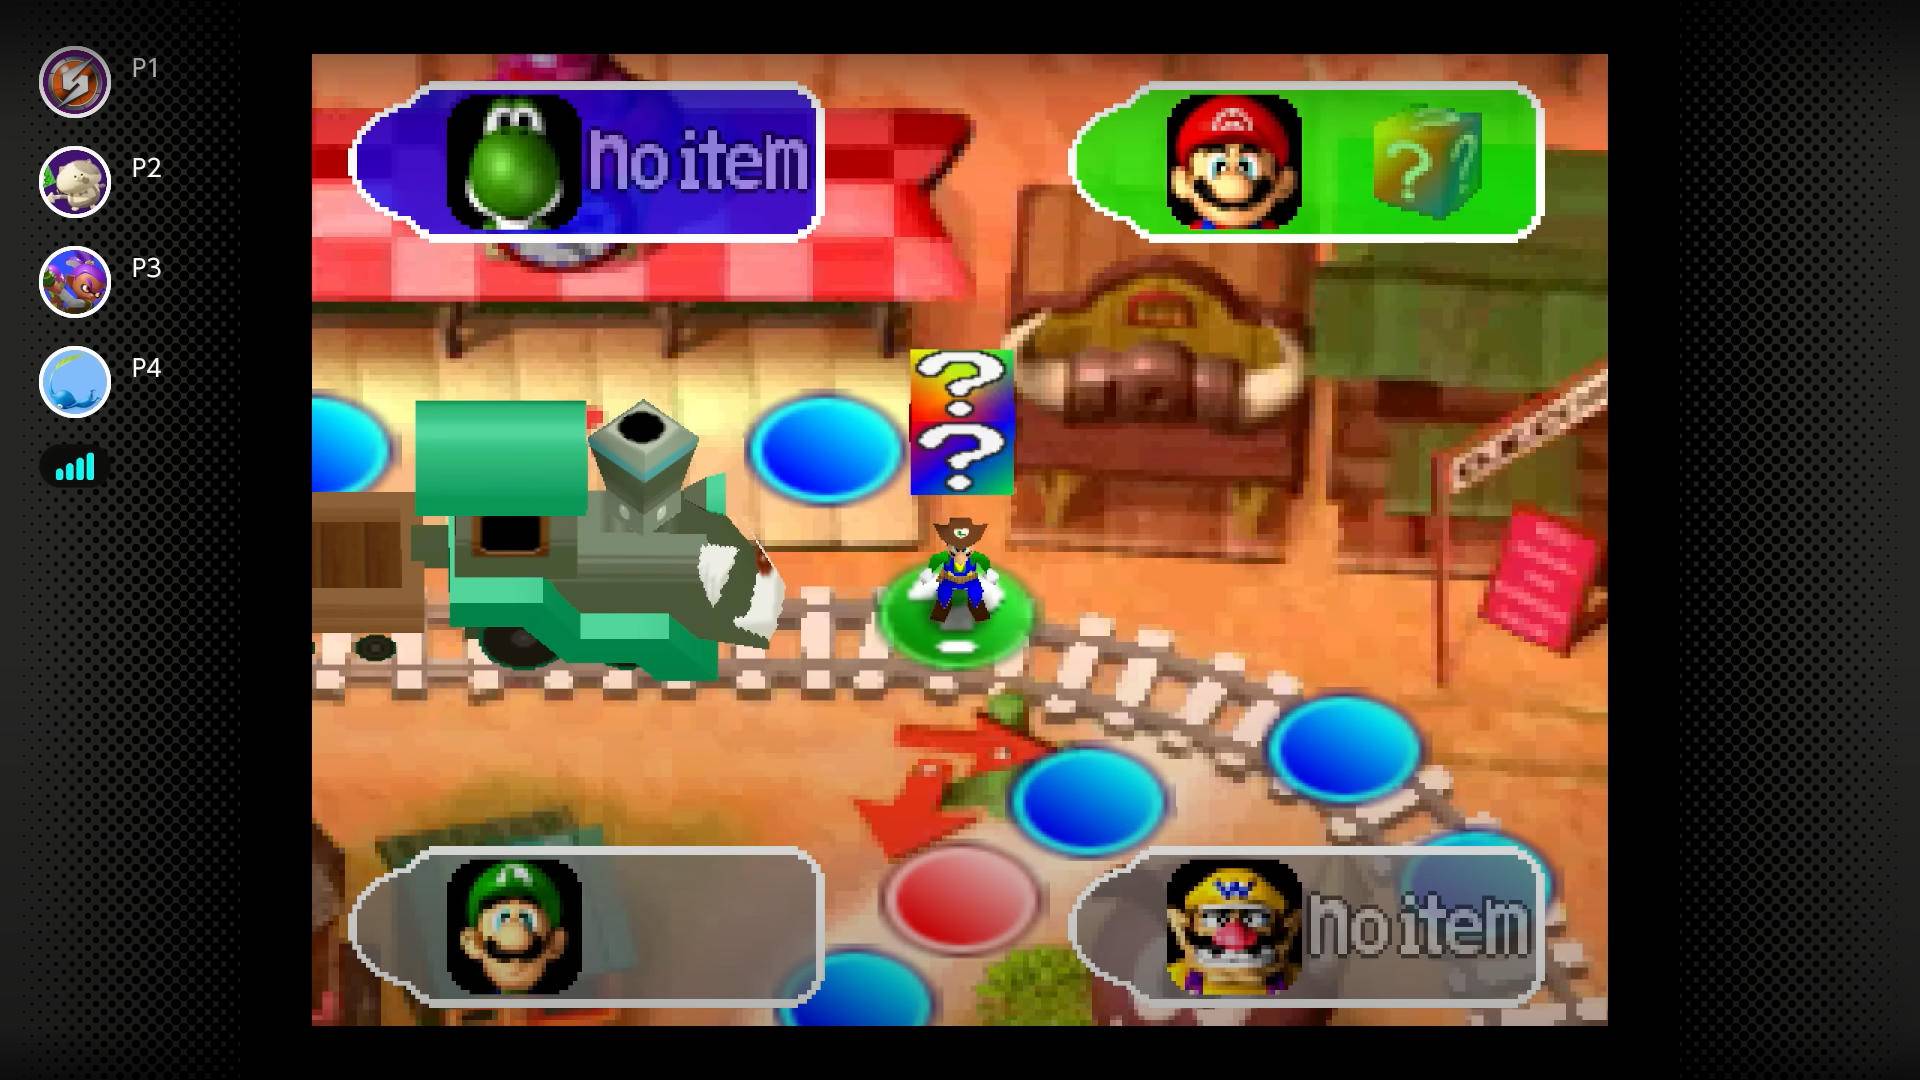 Our favourite Mario Party games